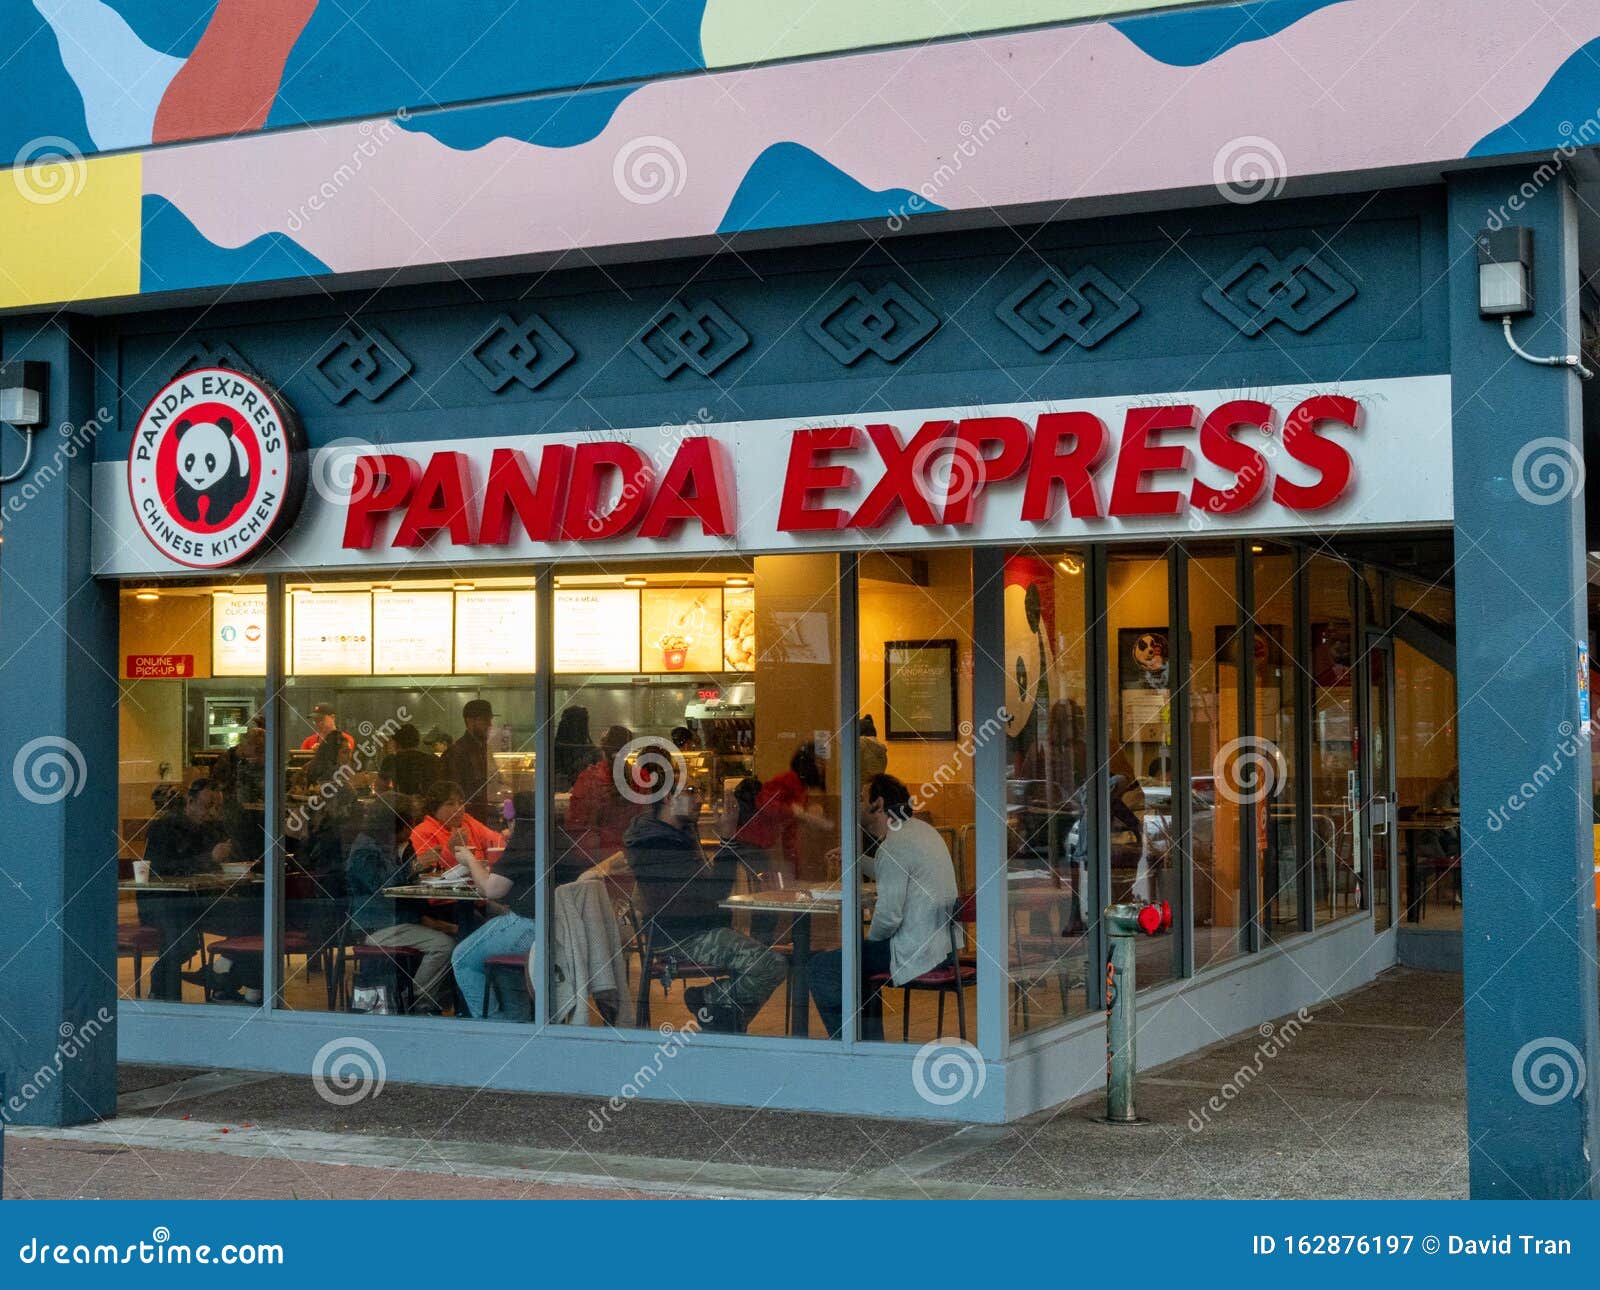 Panda Express Asian Fast Food Location on Street Editorial Photography -  Image of honey, calories: 162876197